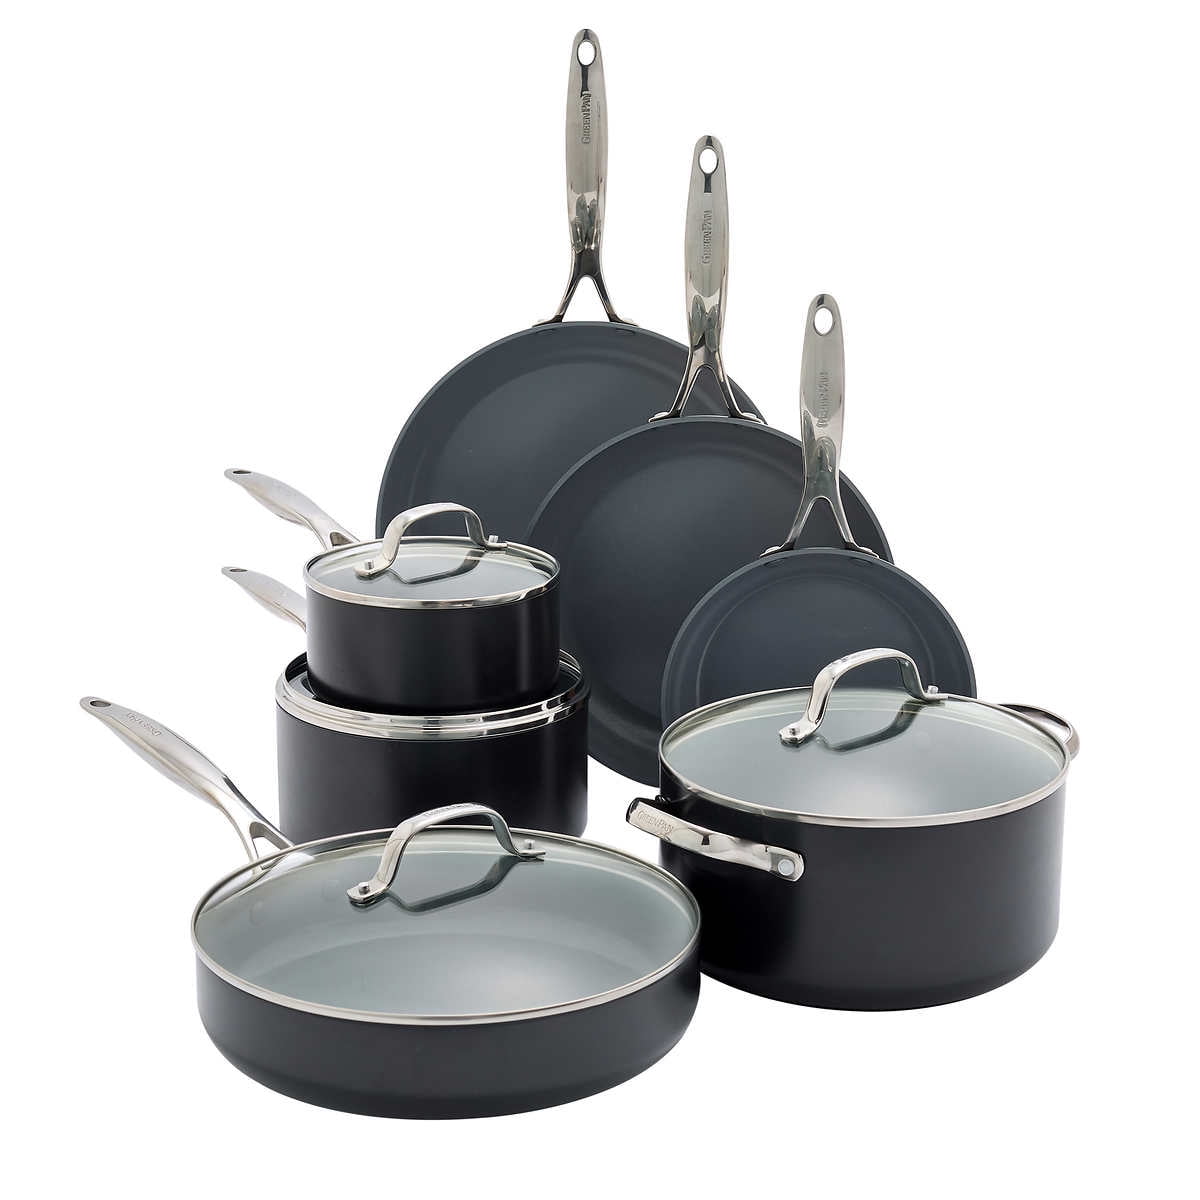  GreenPan Valencia Pro Hard Anodized Healthy Ceramic Nonstick 11  Piece Cookware Pots and Pans Set, PFAS-Free, Induction, Dishwasher Safe,  Oven Safe, Gray: Home & Kitchen